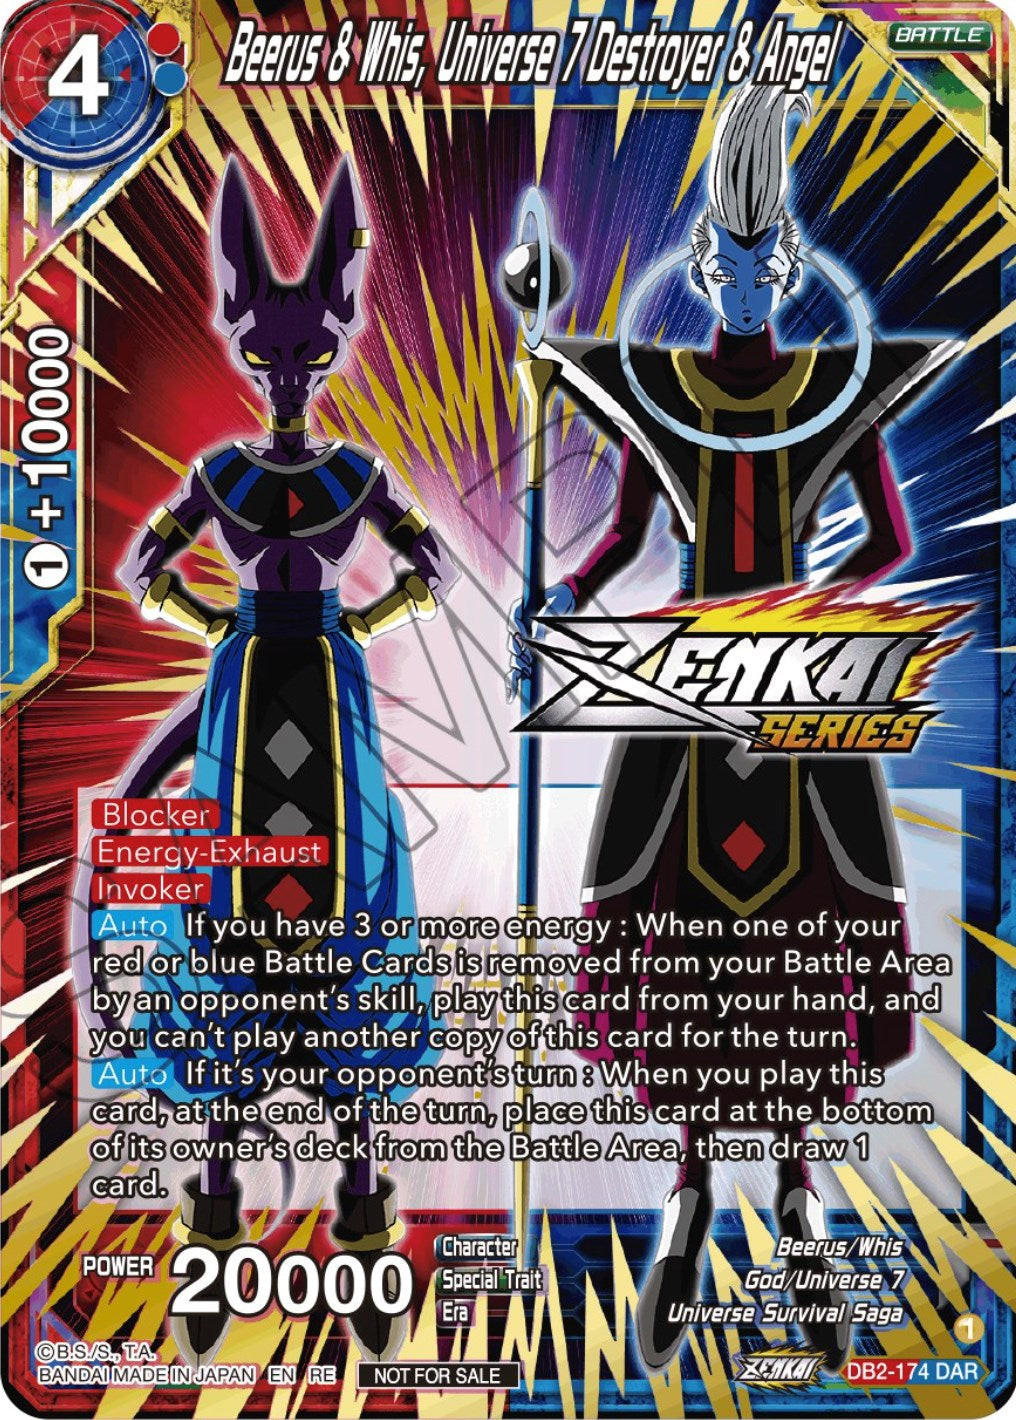 Beerus & Whis, Universe 7 Destroyer & Angel (Event Pack 12) (DB2-174) [Tournament Promotion Cards] | The Time Vault CA